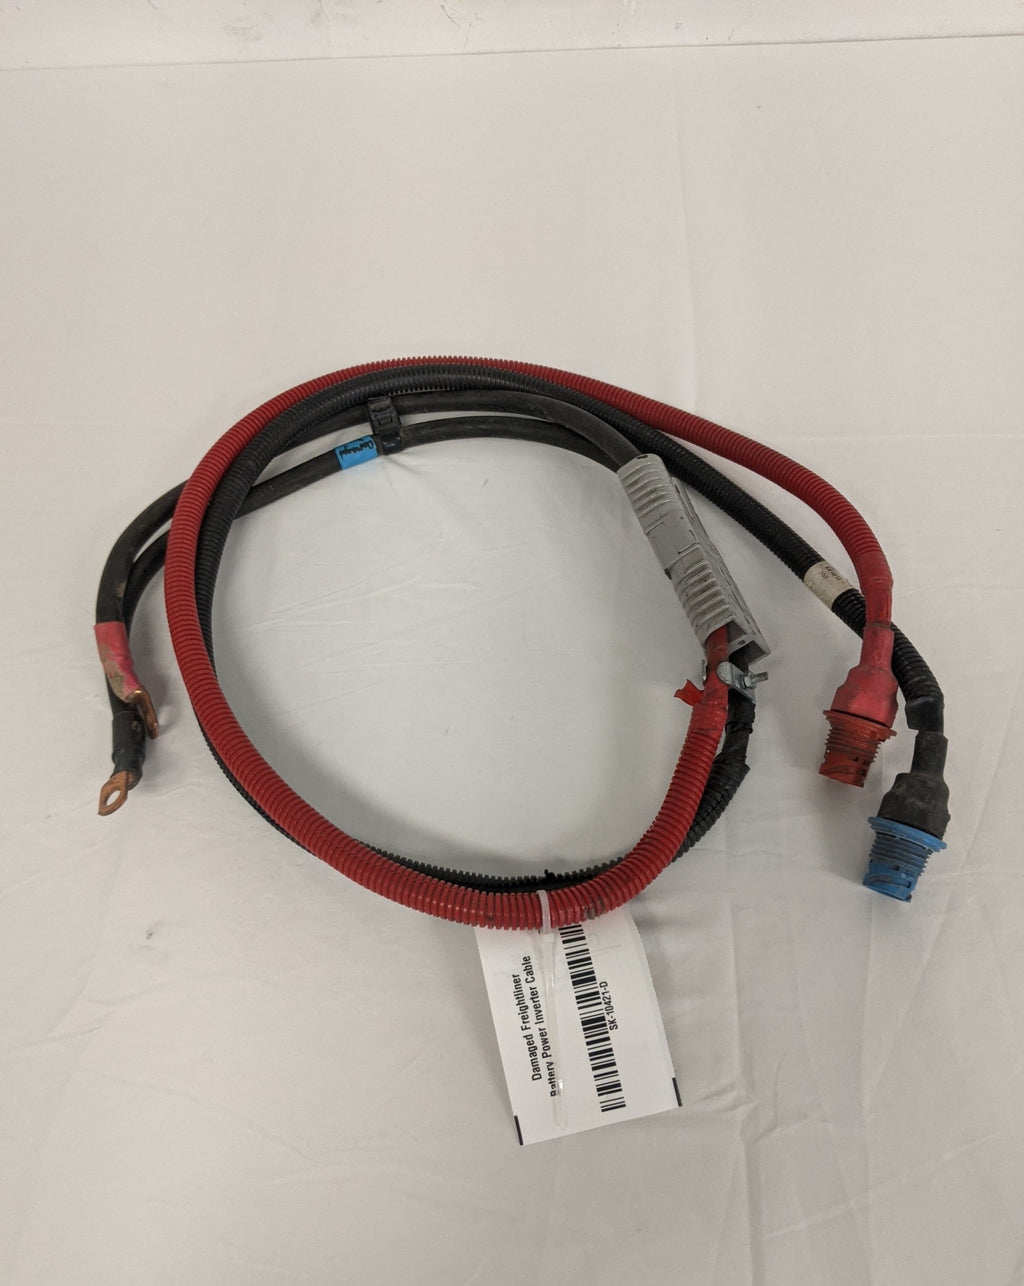 Damaged Freightliner Battery Power Inverter Cable - P/N A06-54645-053